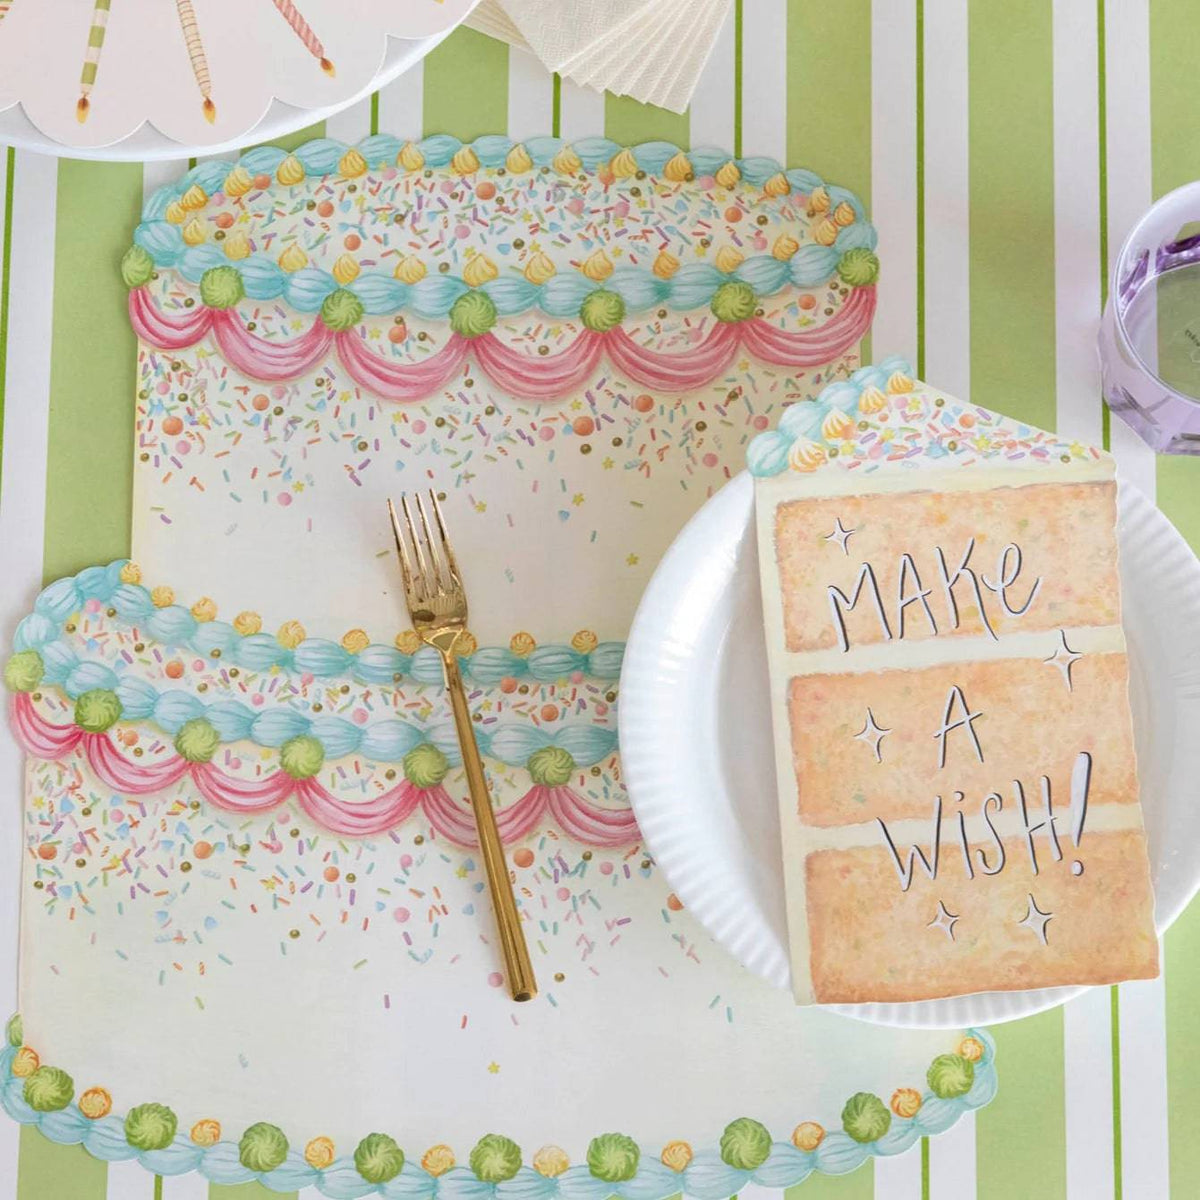 Die-Cut Birthday Placemats - The Preppy Bunny